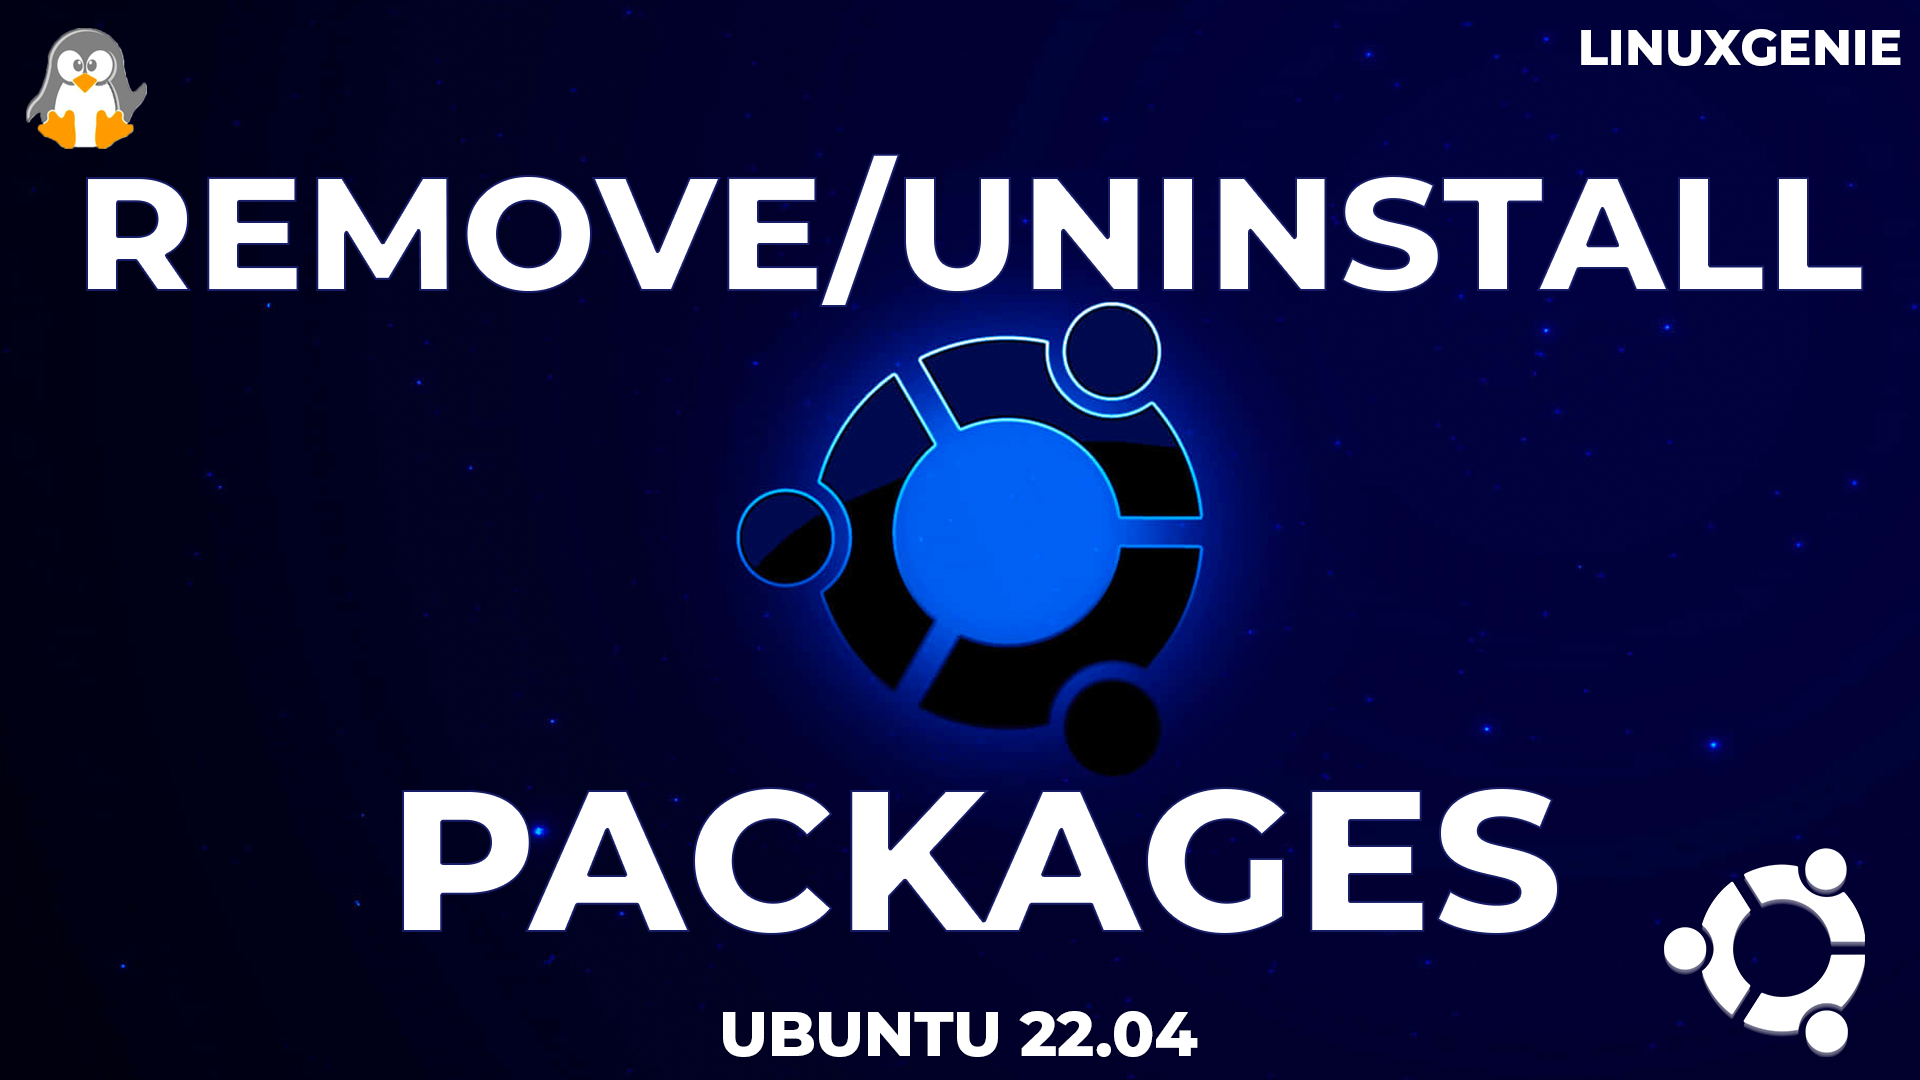 How to Remove/Uninstall Packages on Ubuntu 22.04